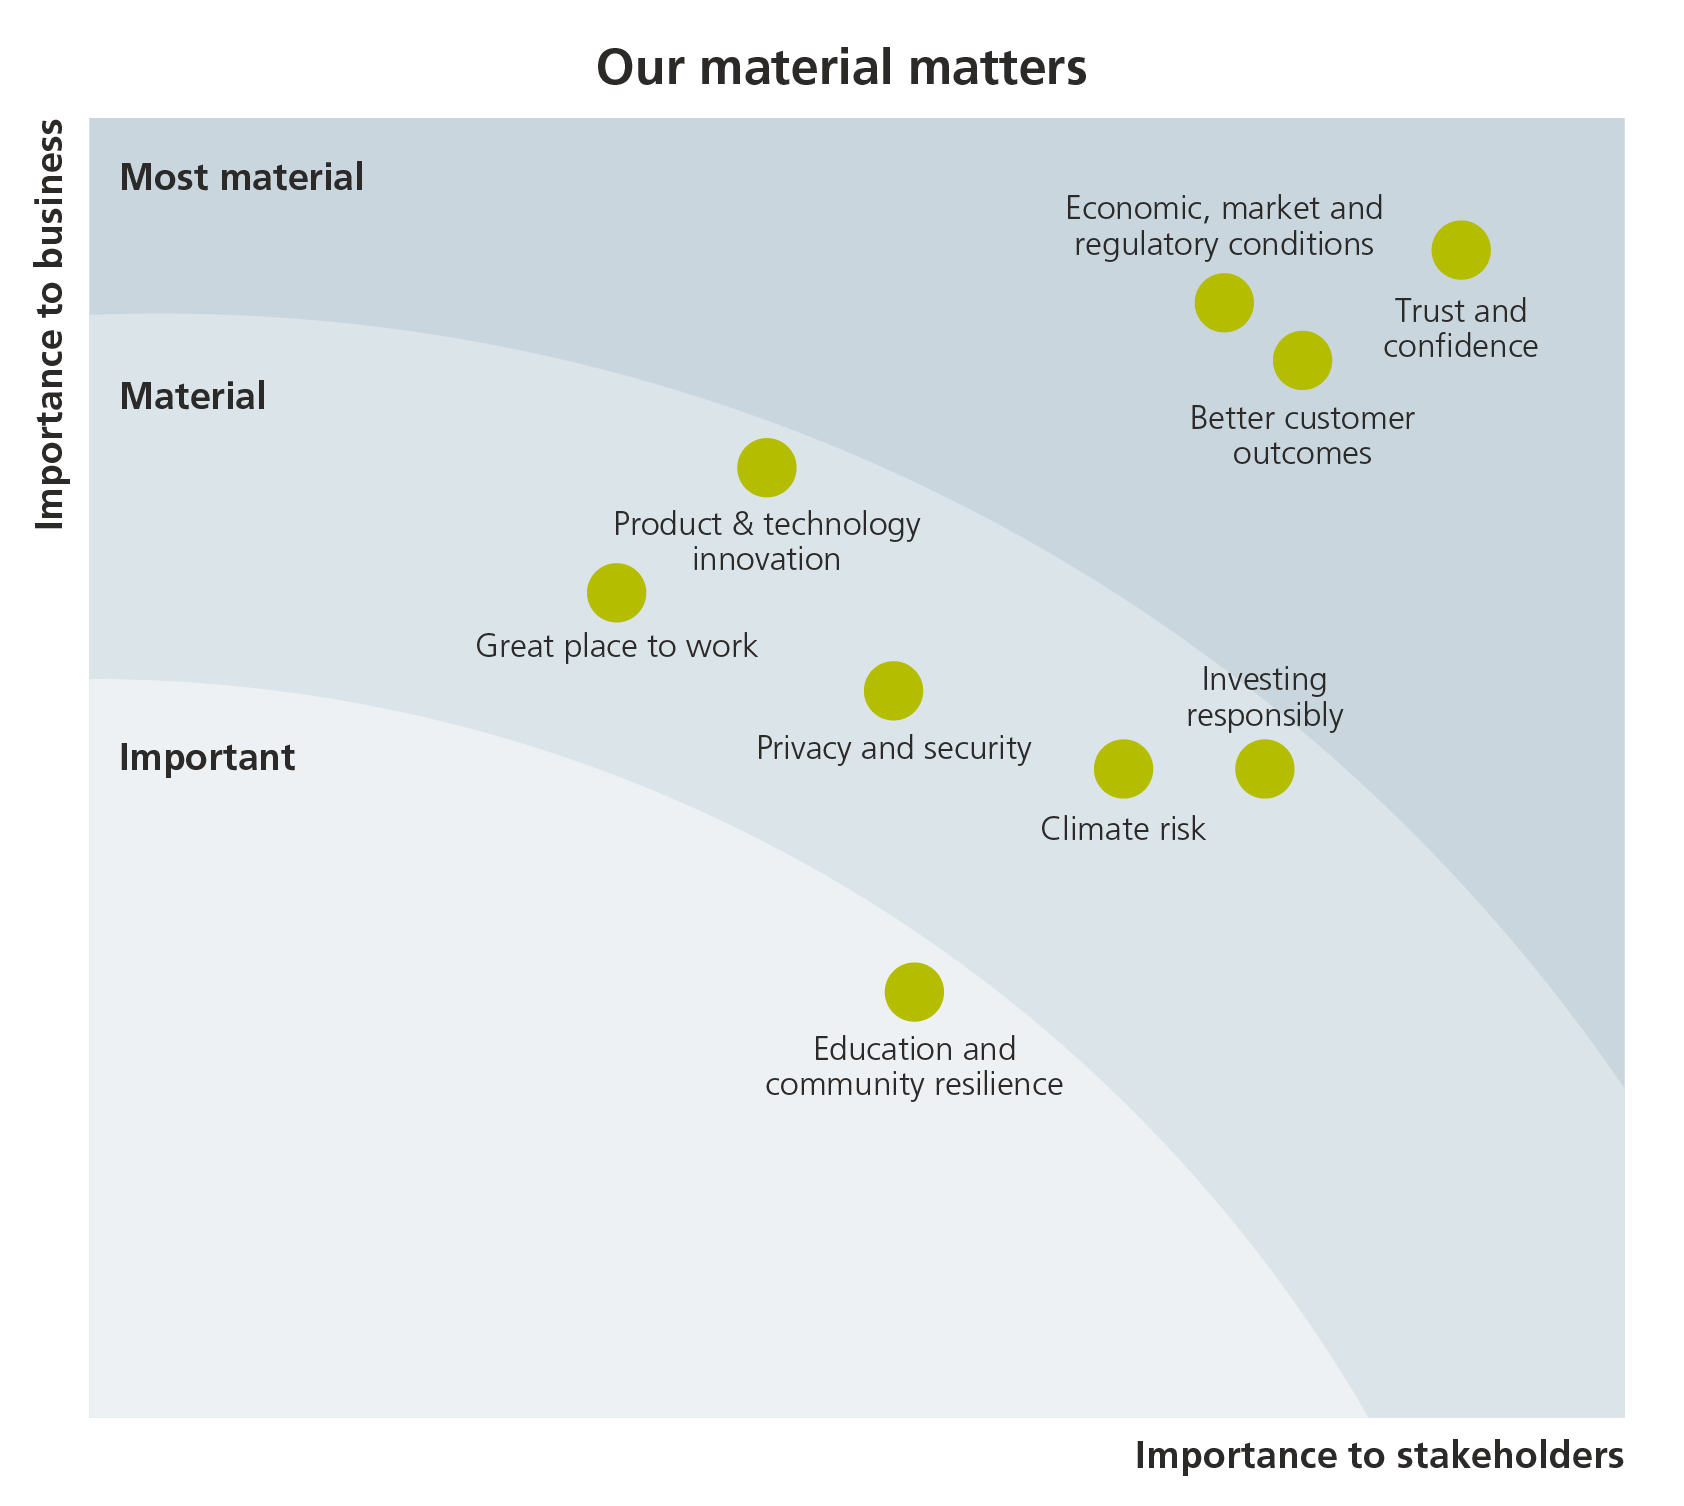 Our material matters